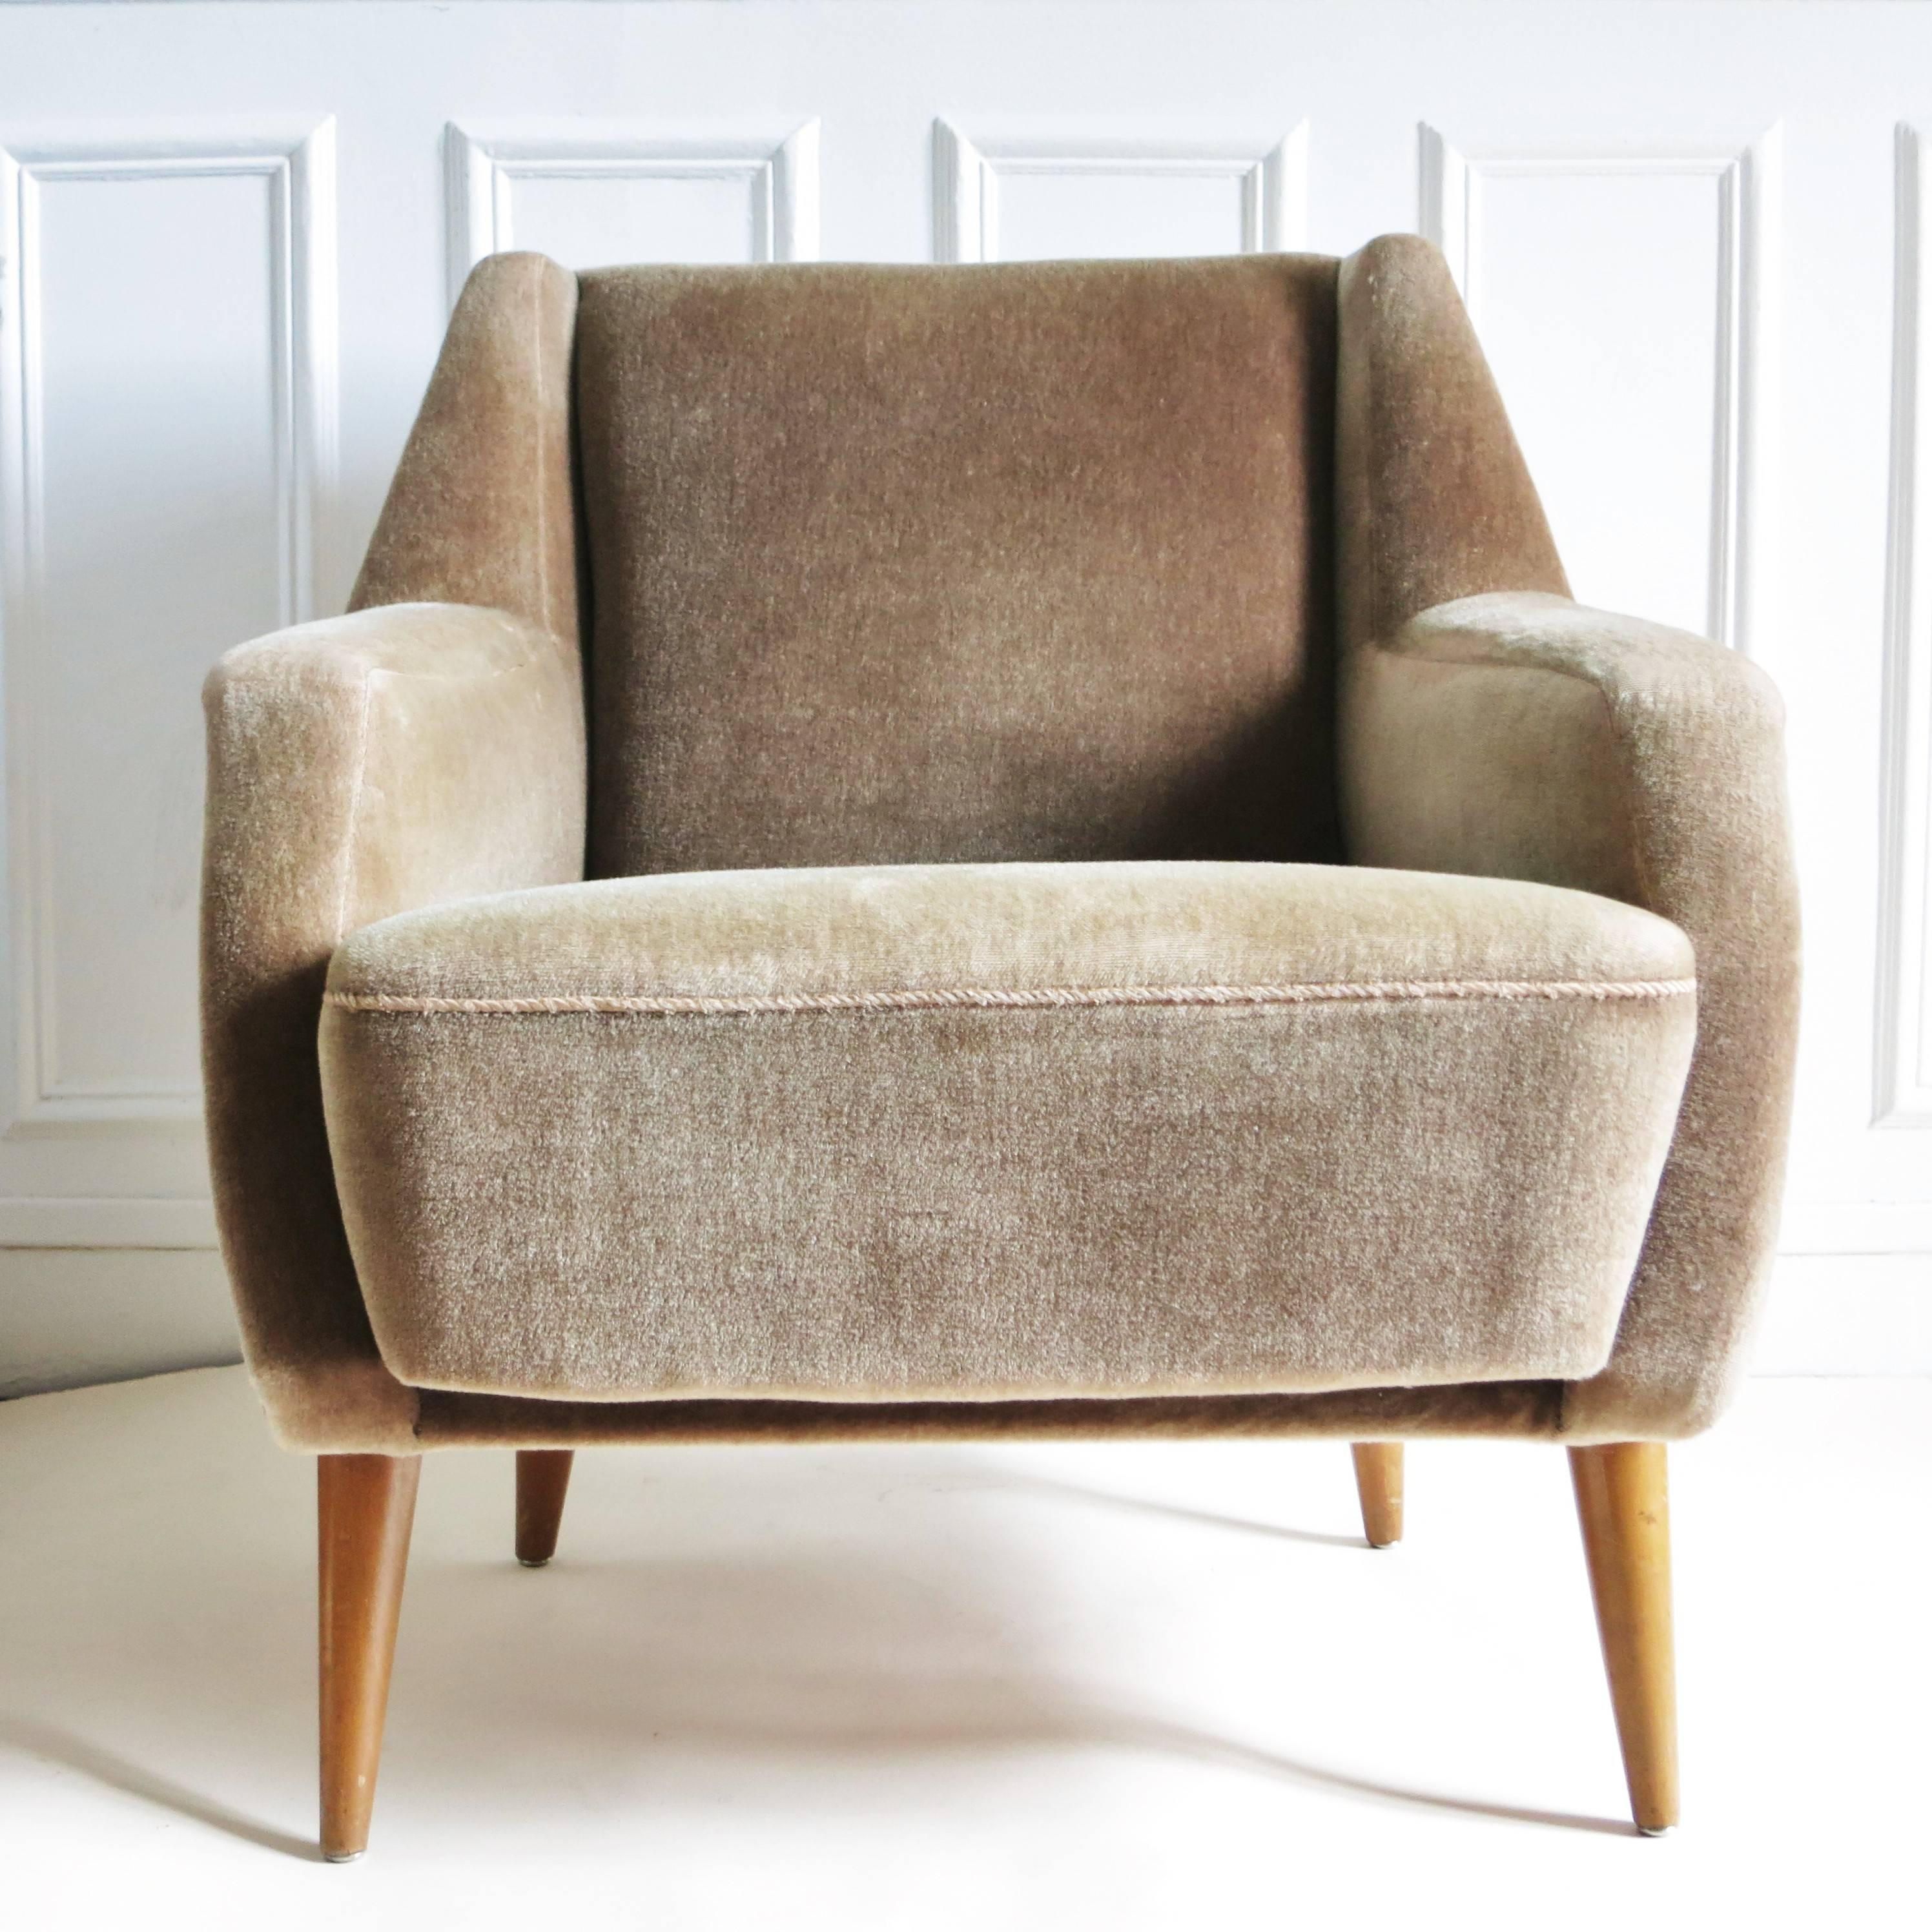 Armchair Model 802, in light brown velvet and wood, by Carlo de Carli, for Cassina Italy, 1953.
The highly comfortable easy chair still has its original velvet upholstery, in good condition.